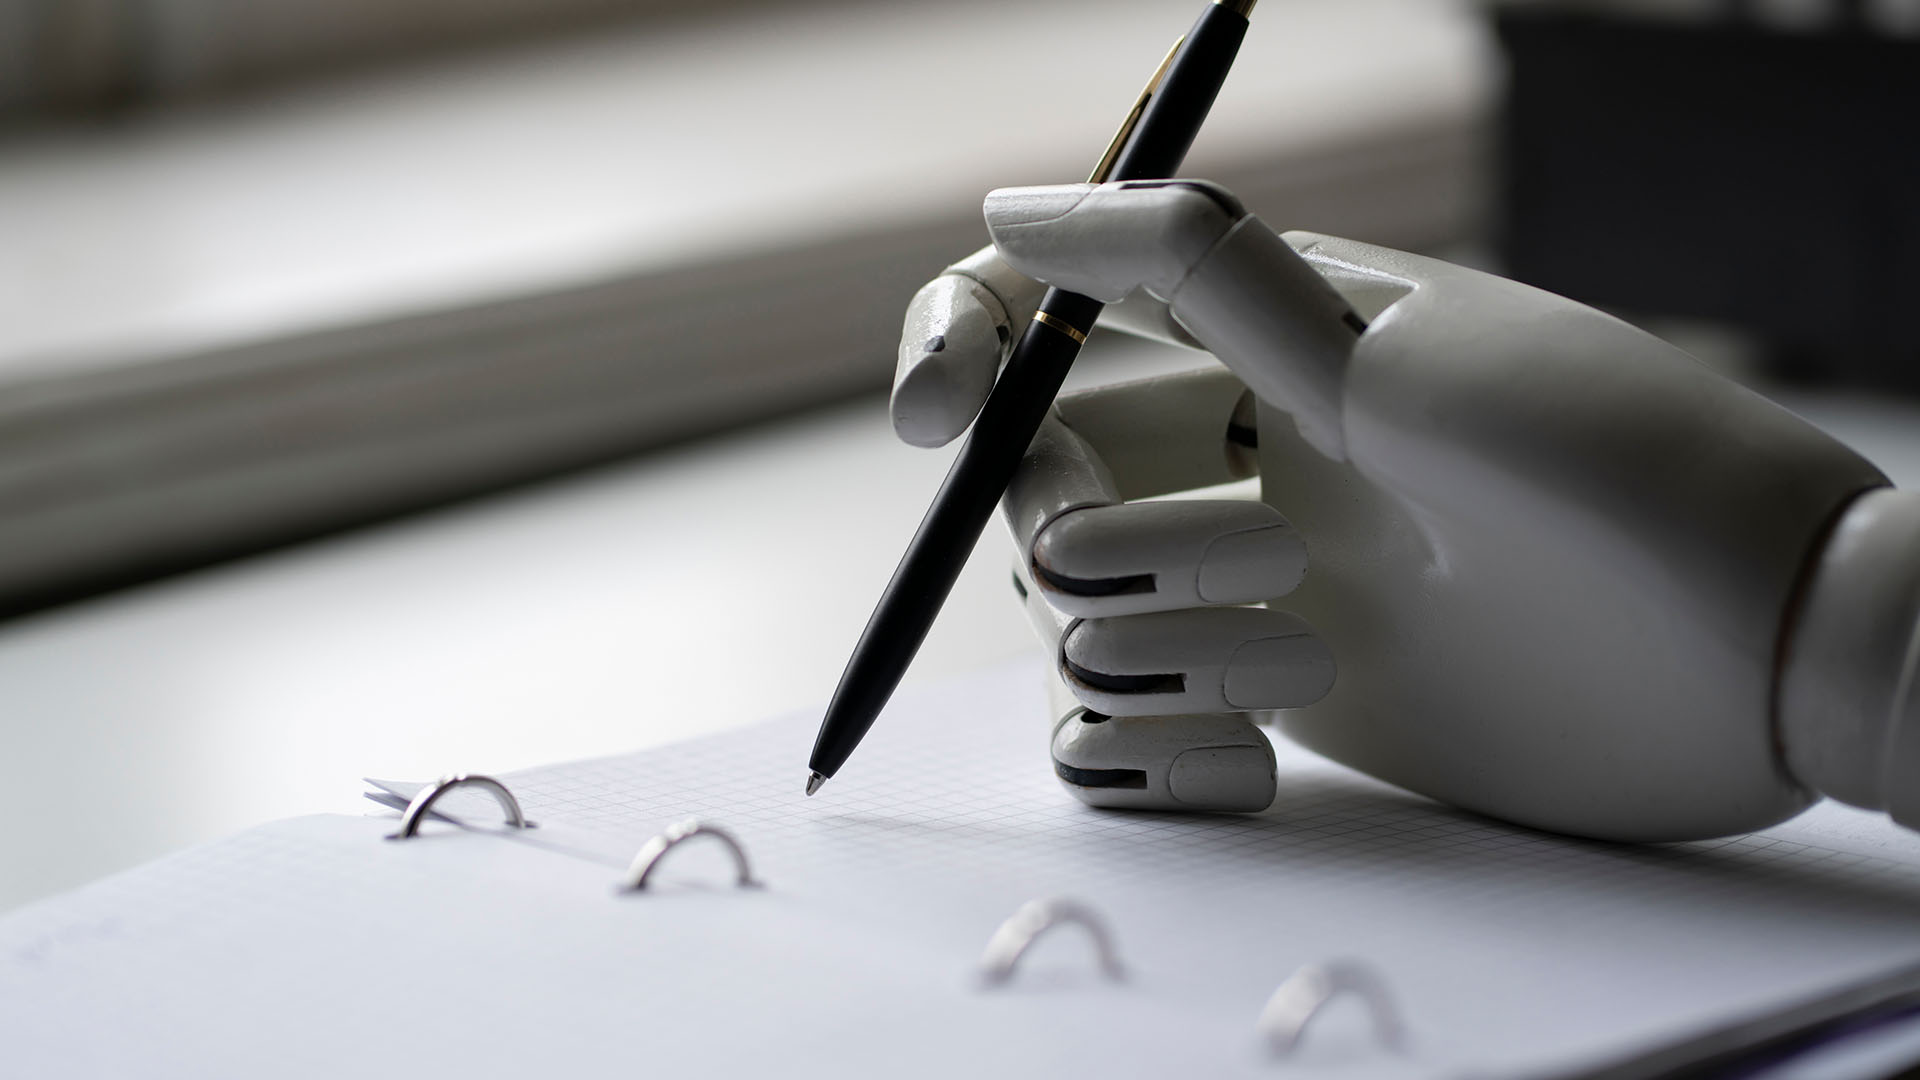 A robotic hand holds a pen over an open notebook with binder rings, symbolizing the ongoing Battle for the Newsroom as automation reshapes how stories are crafted.